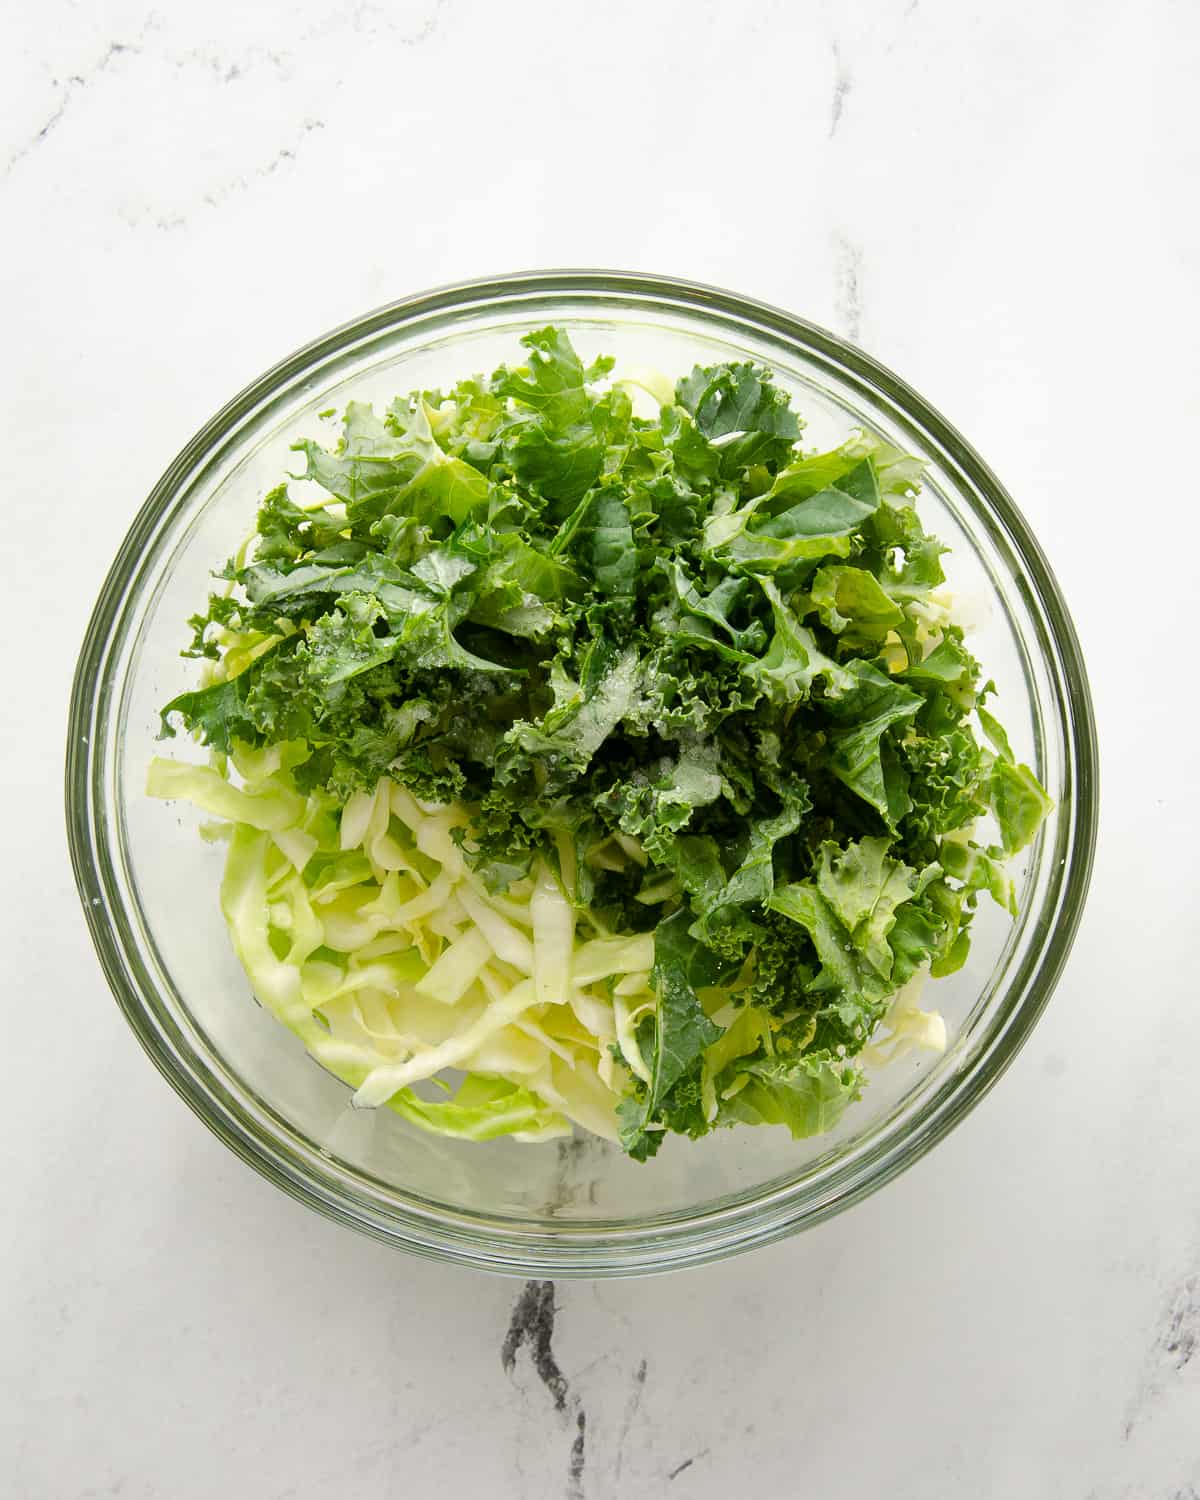 A glass bowl full of shredded cabbage and kale.